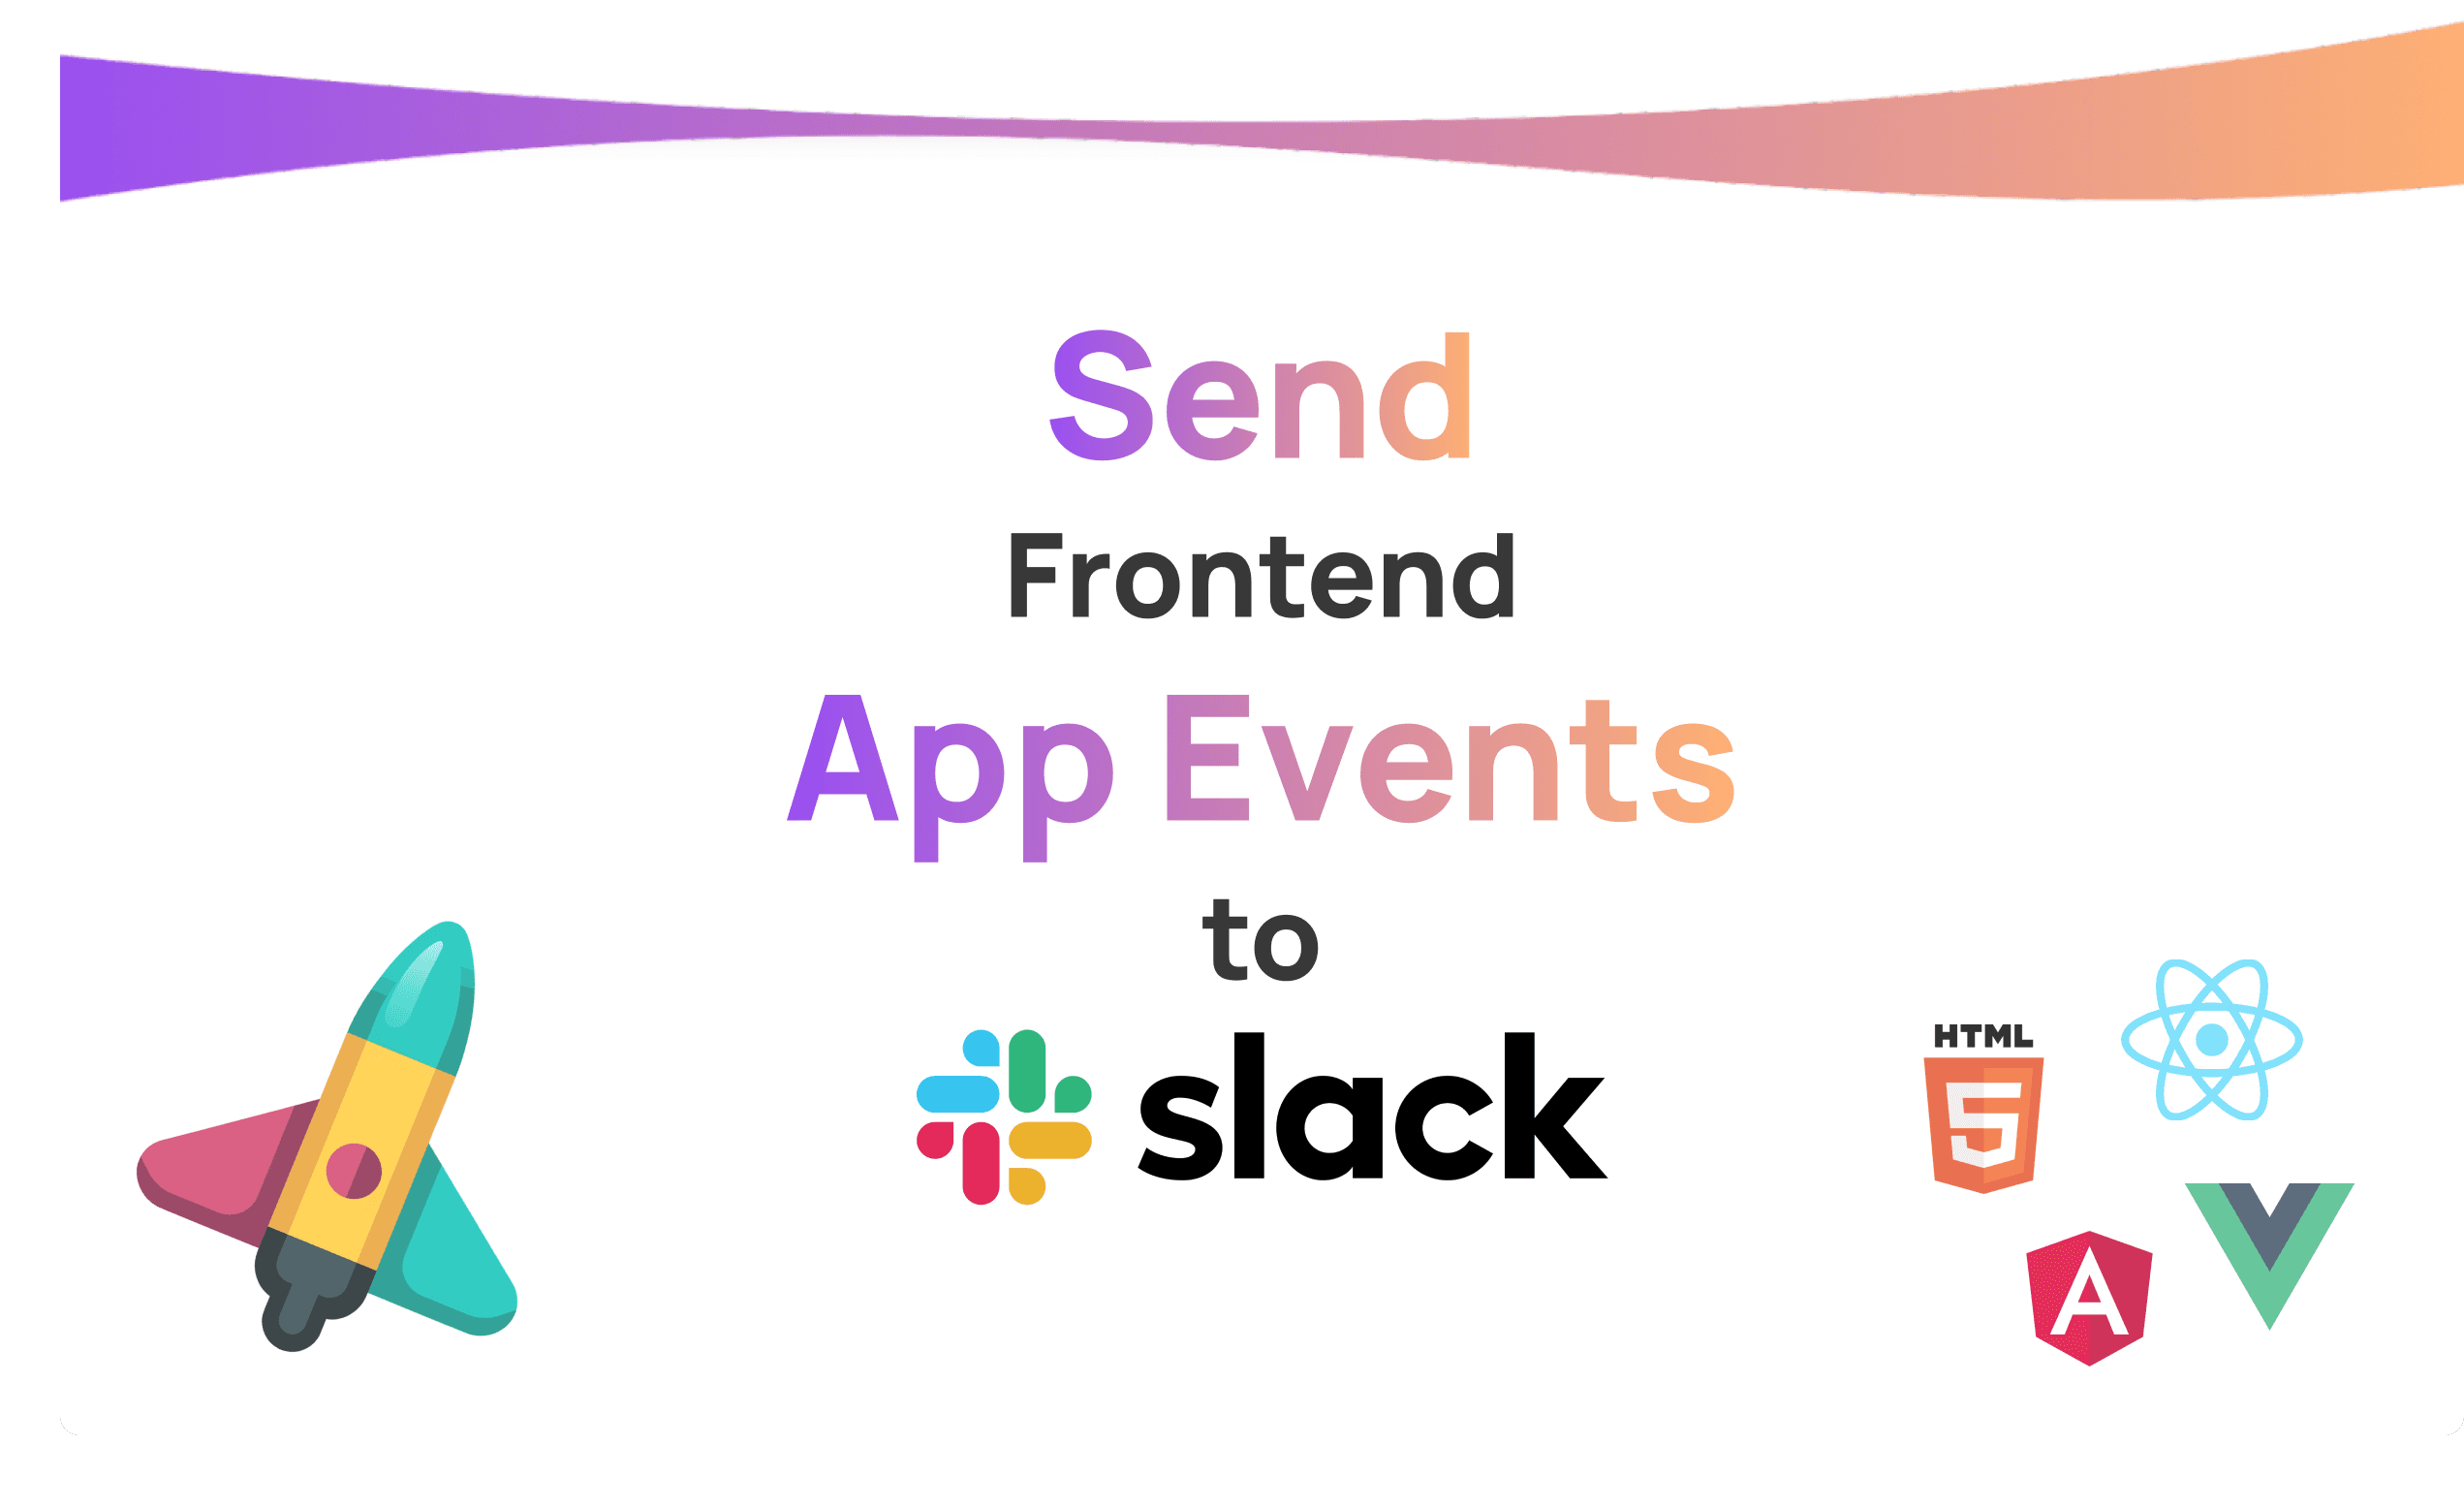 Send Frontend App Events Directly to Slack